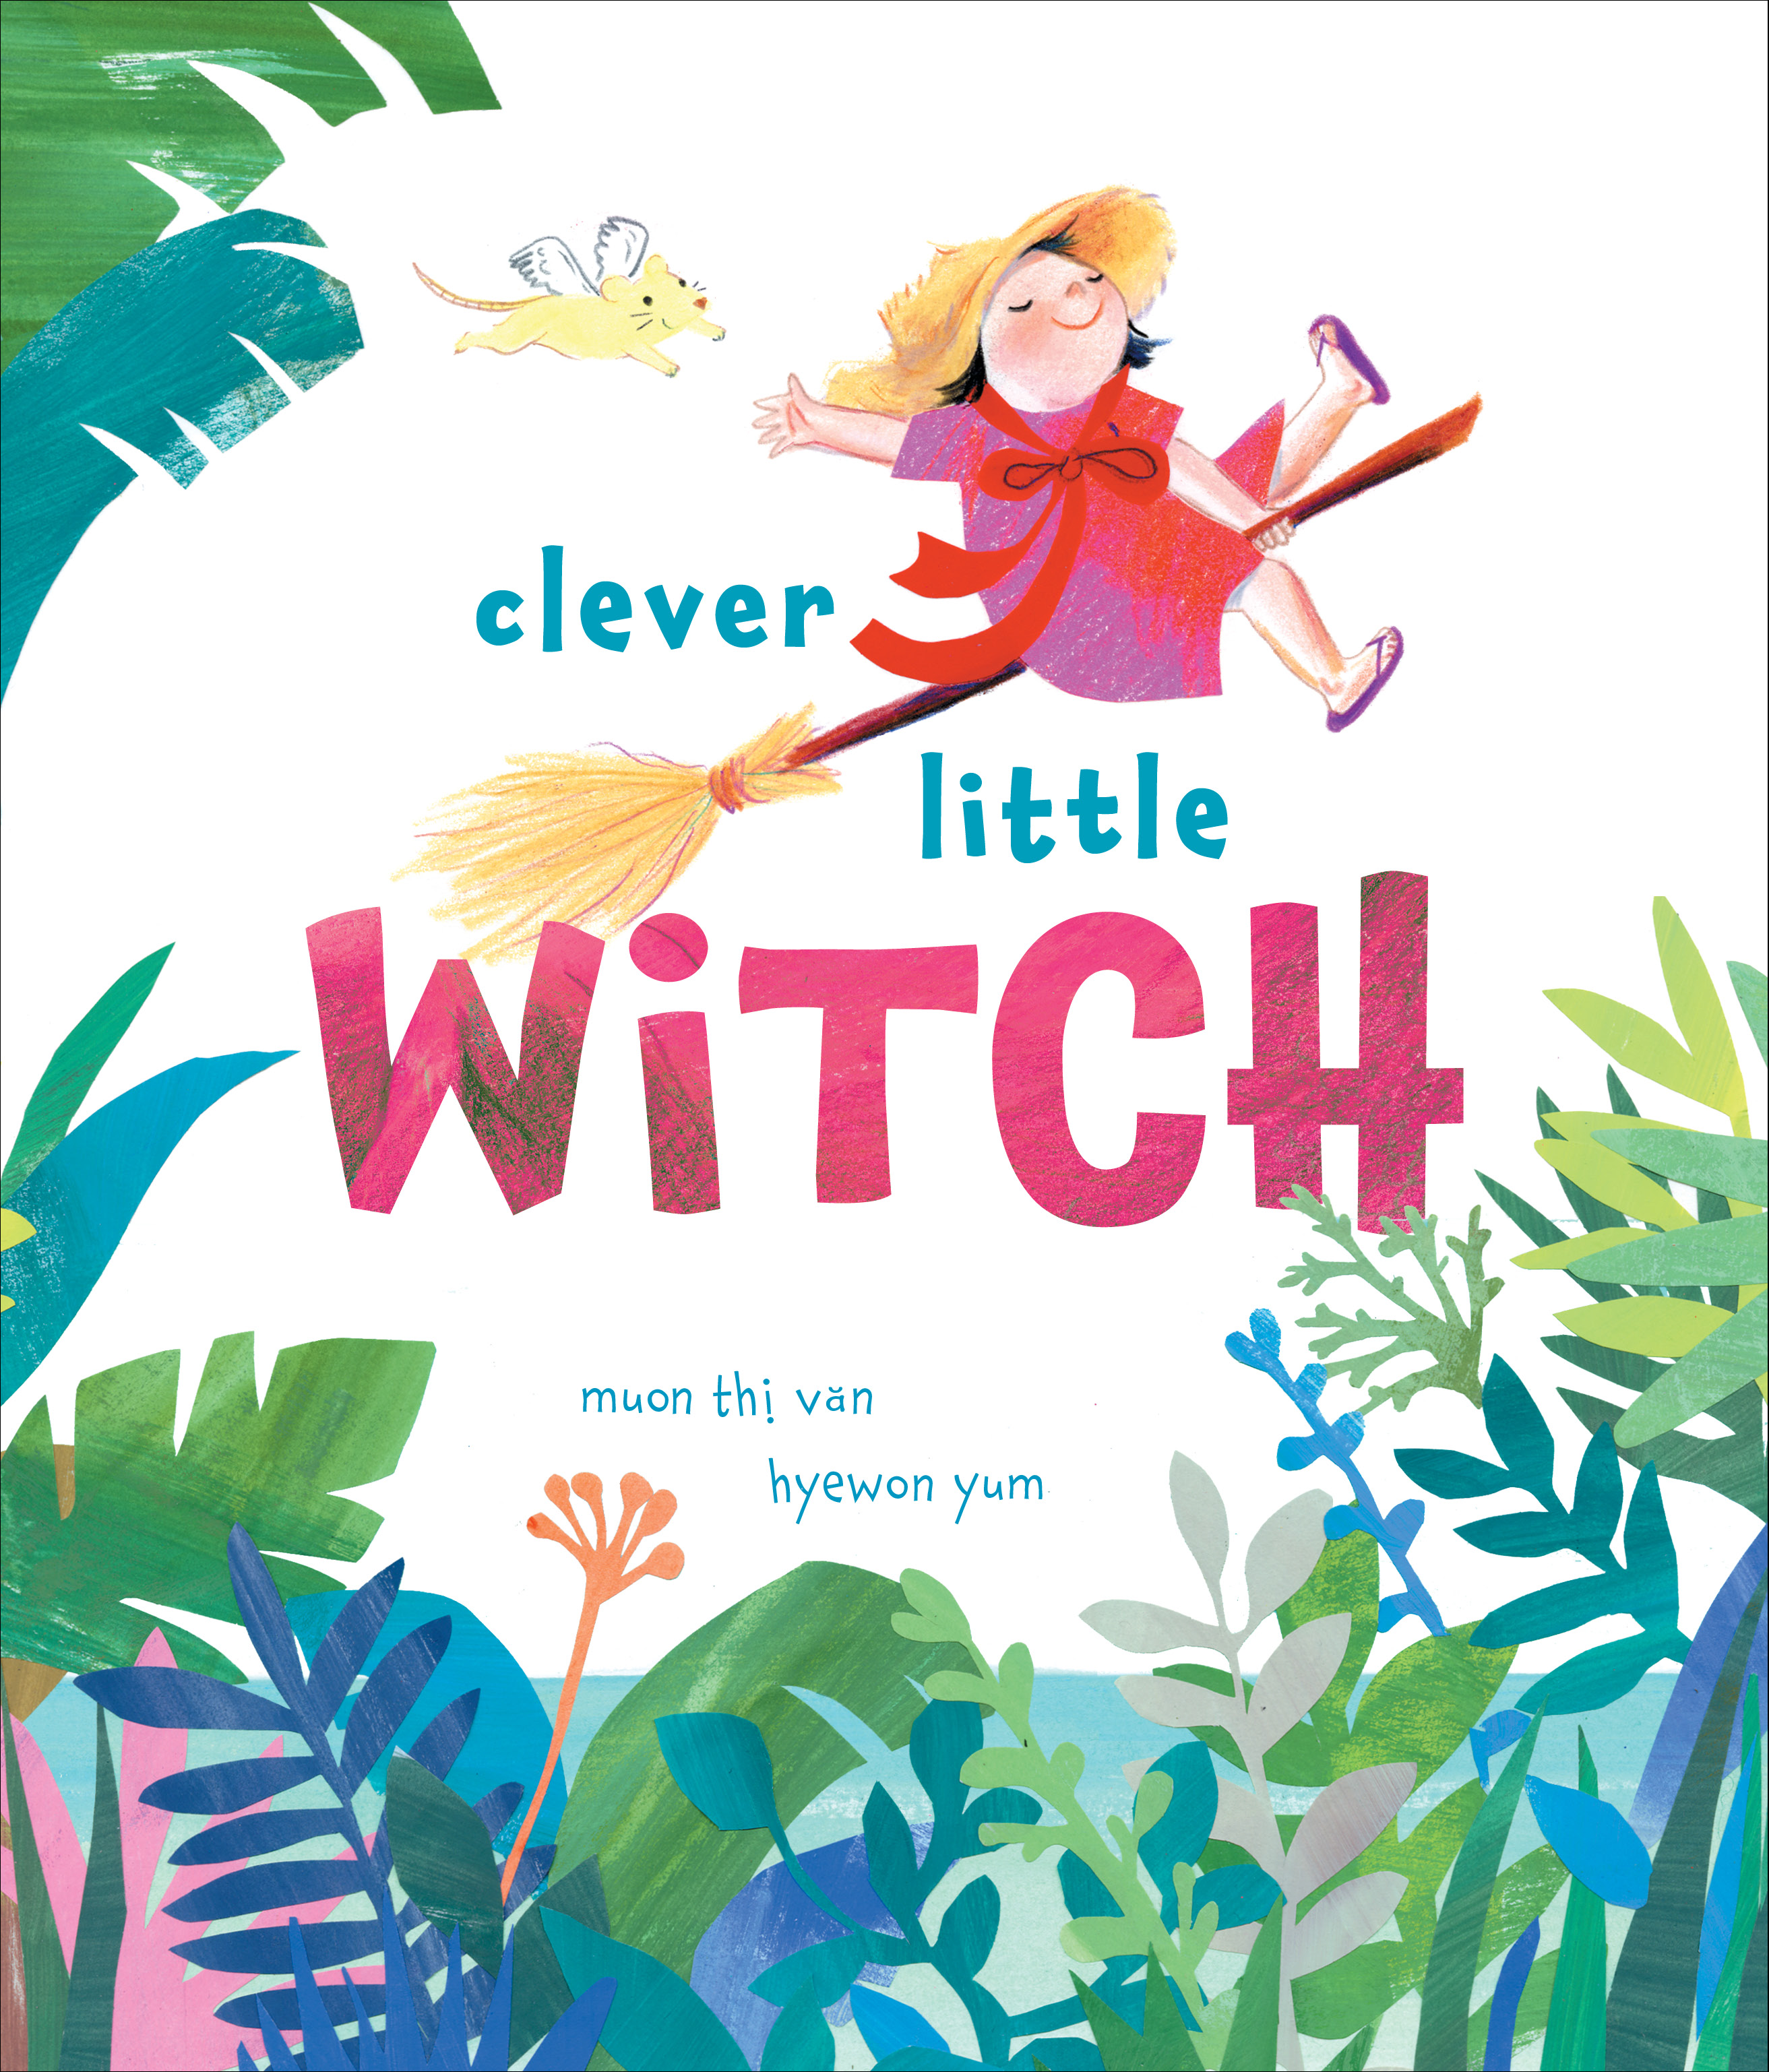 Sunday Story Time: Clever Little Witch by Hyewon Yum